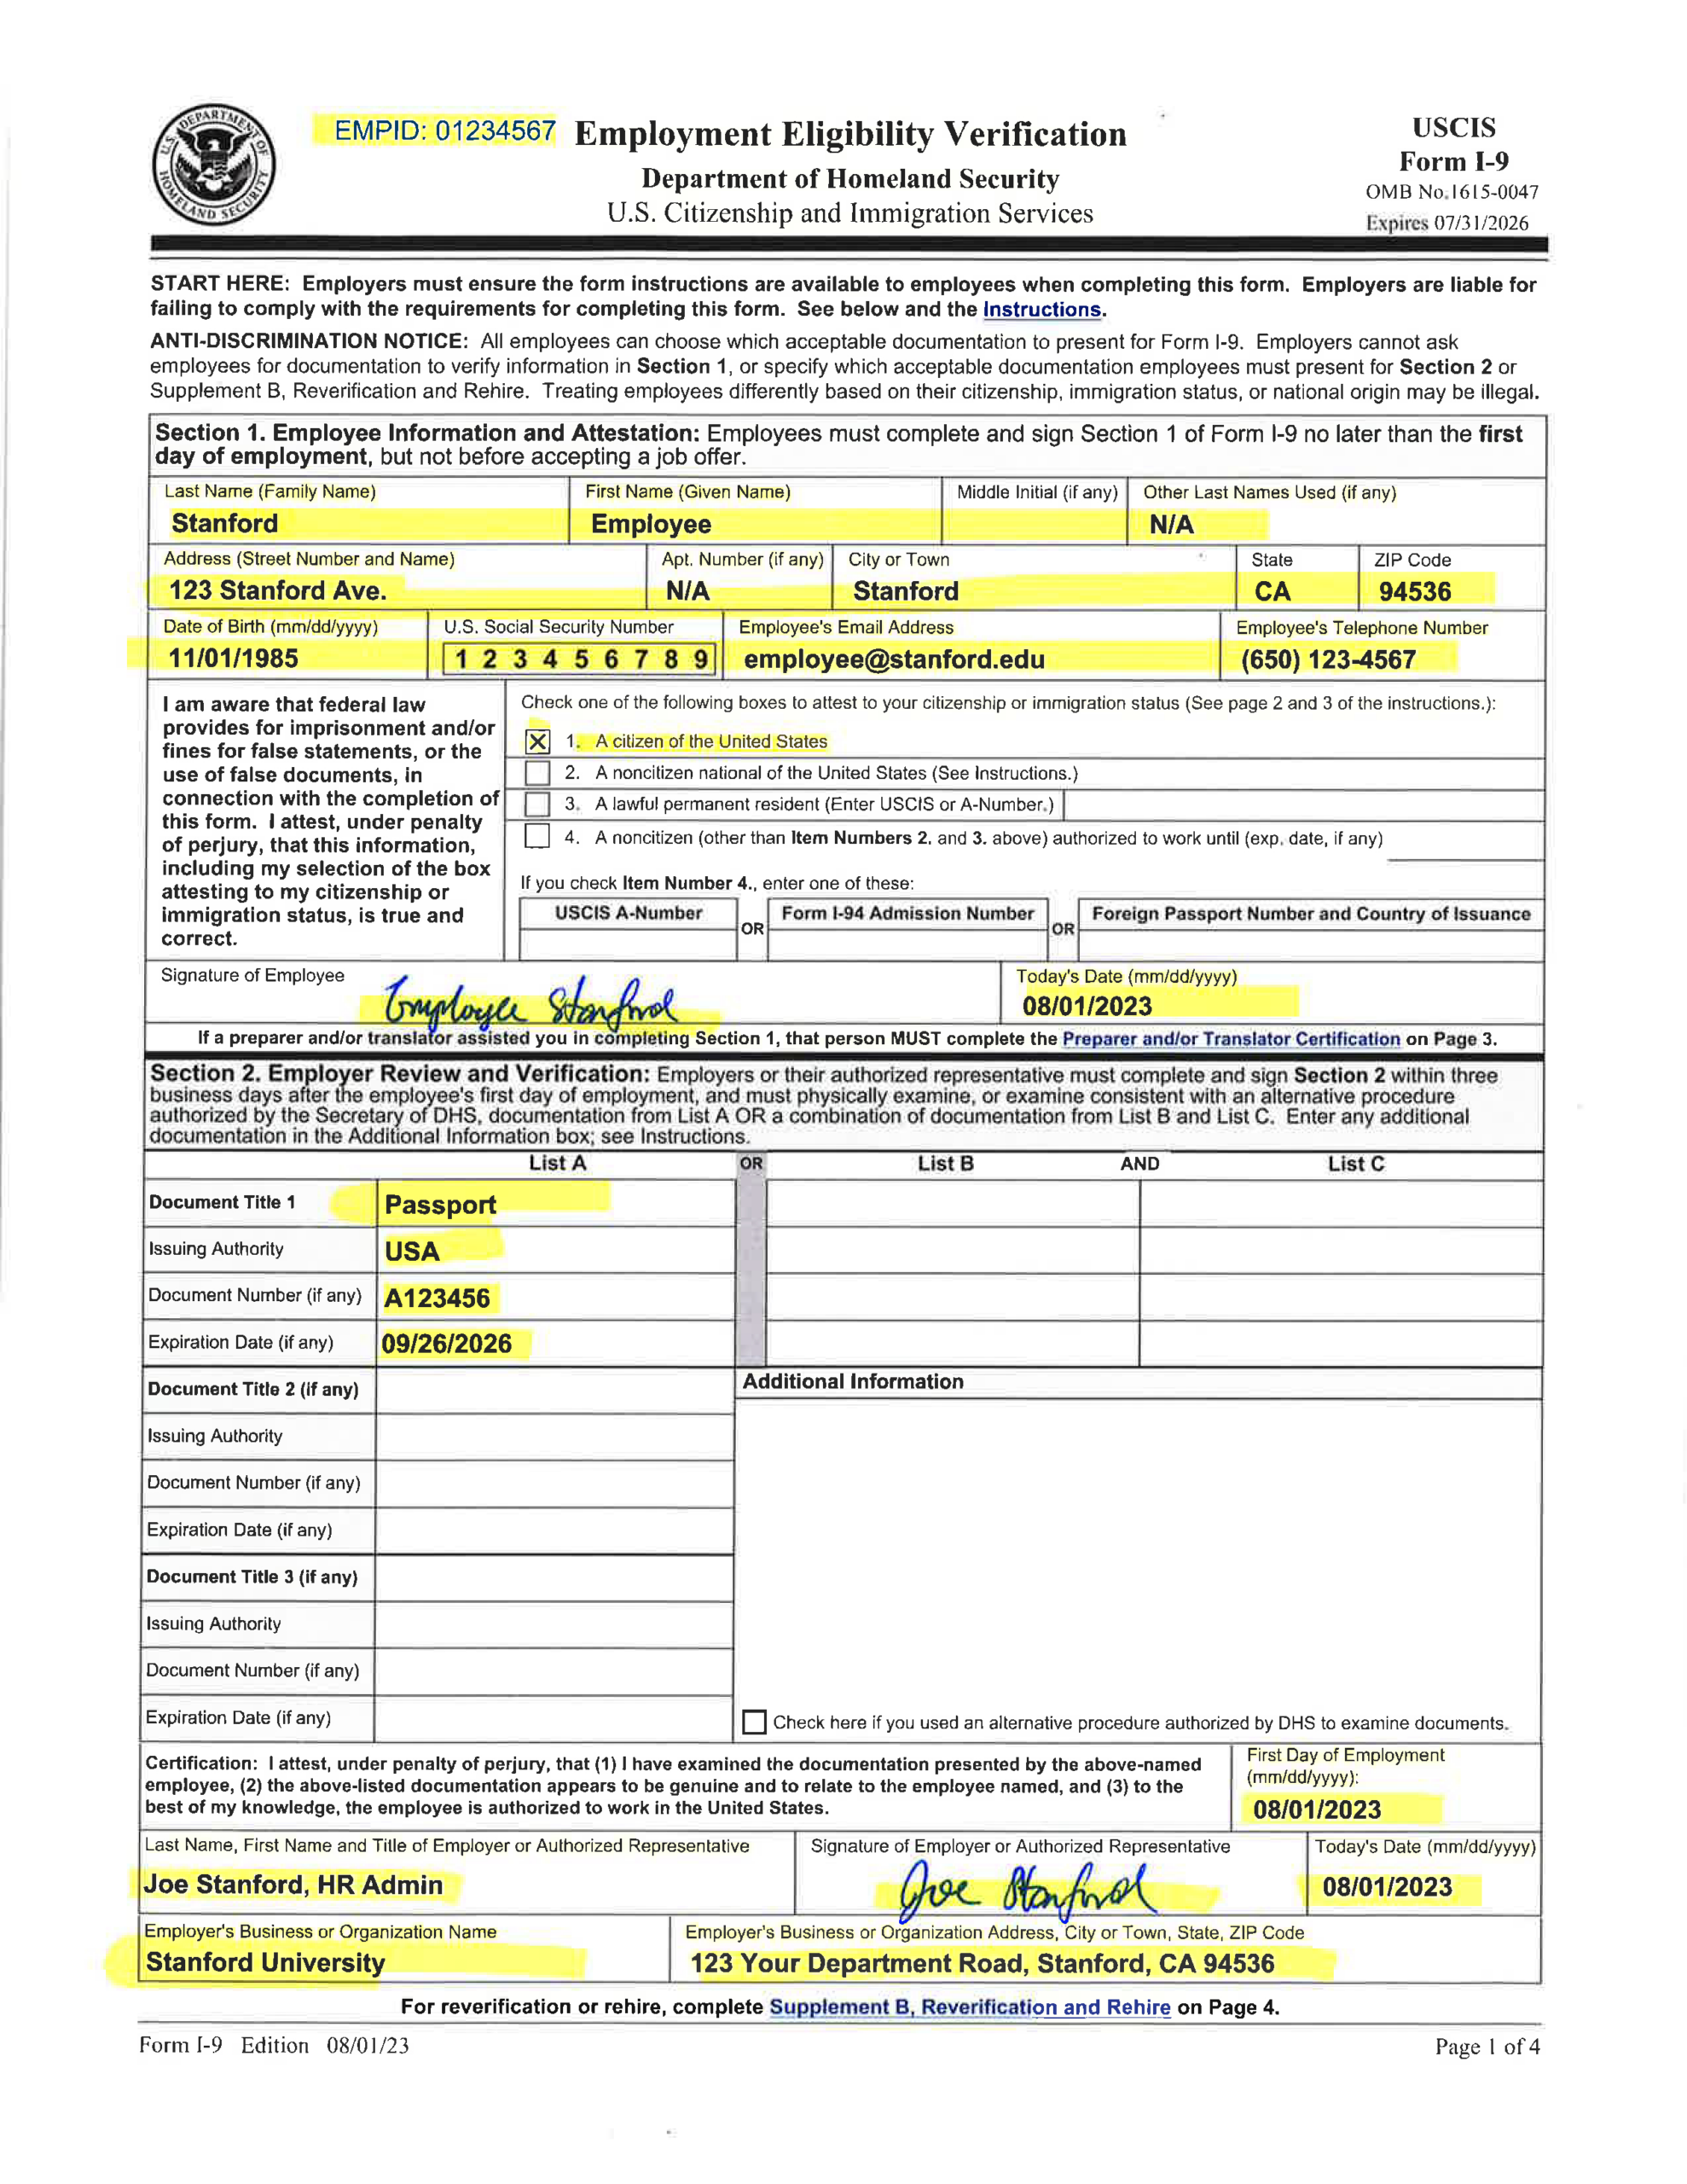 Examples Of Completed Form I-9 For Stanford in What is USCIS I-9 Form